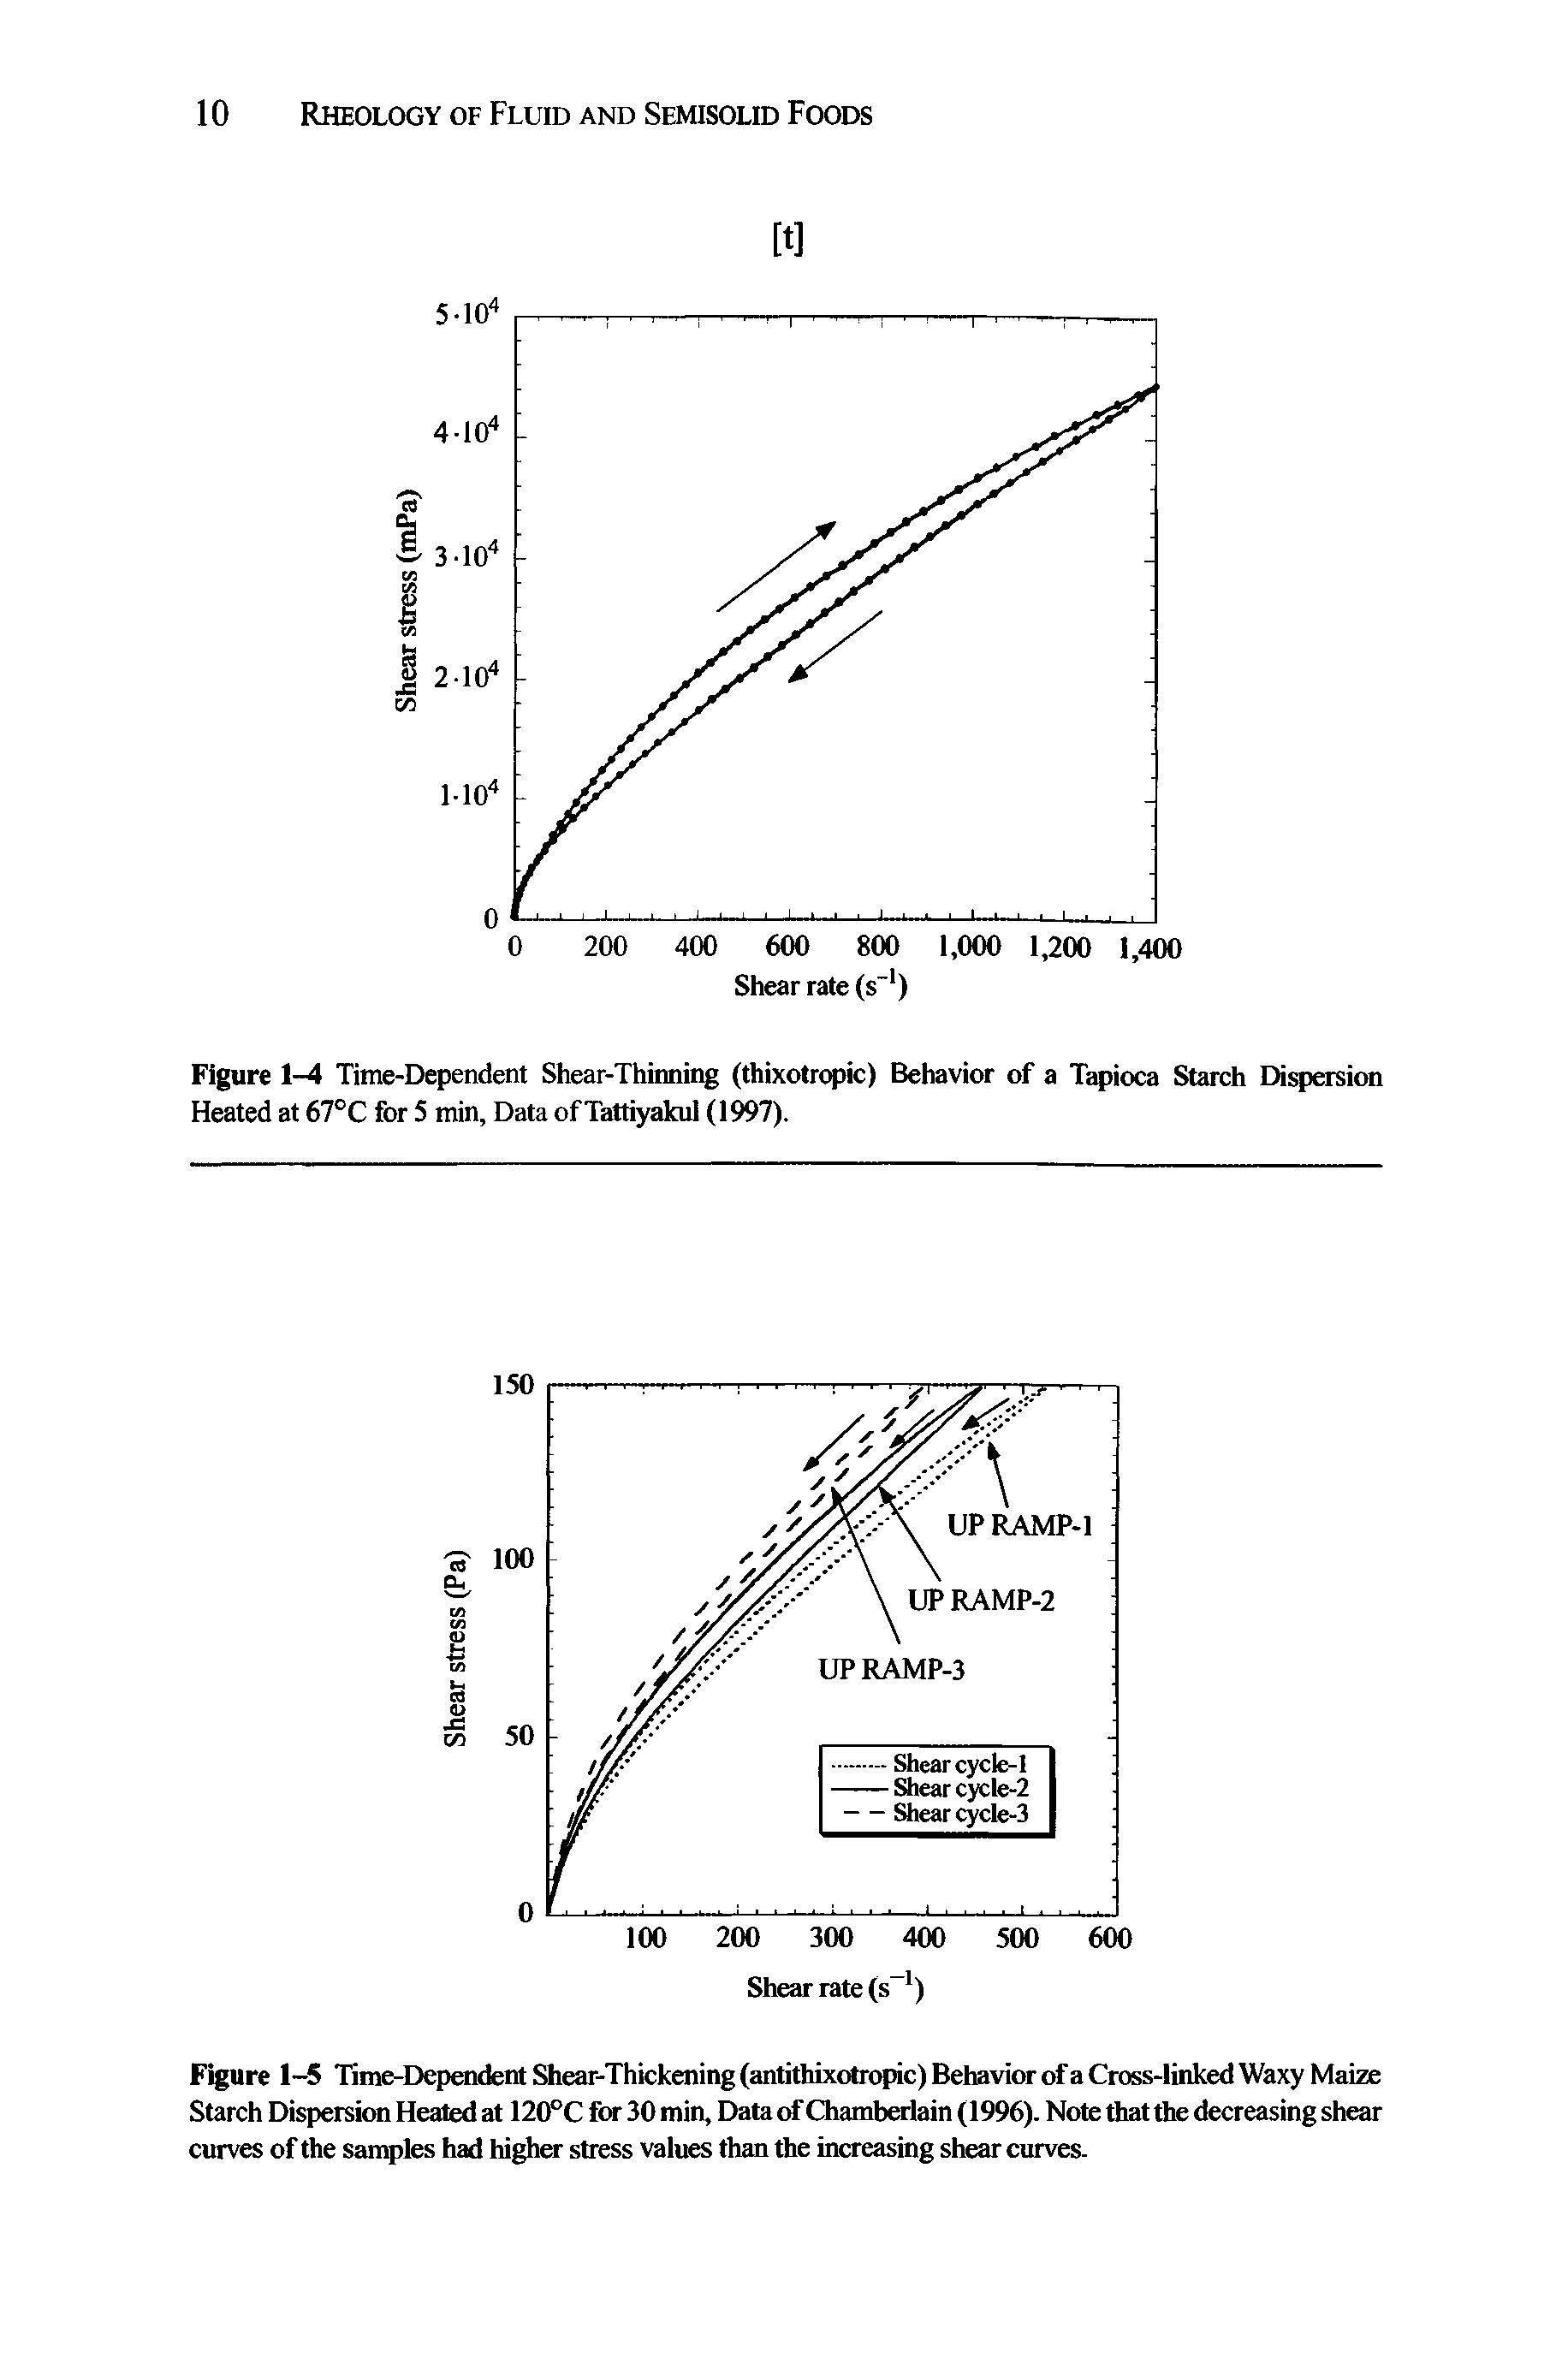 Figure 1-5 Time-Dependent Shear-Thickening (antithixotropic) Behavior of a Cross-linked Waxy Maize Starch Dispersion Heated at 120°C for 30 min. Data of Chamberlain (1996). Note that the decreasing shear curves of the samples had higher stress values than the increasing shear curves.